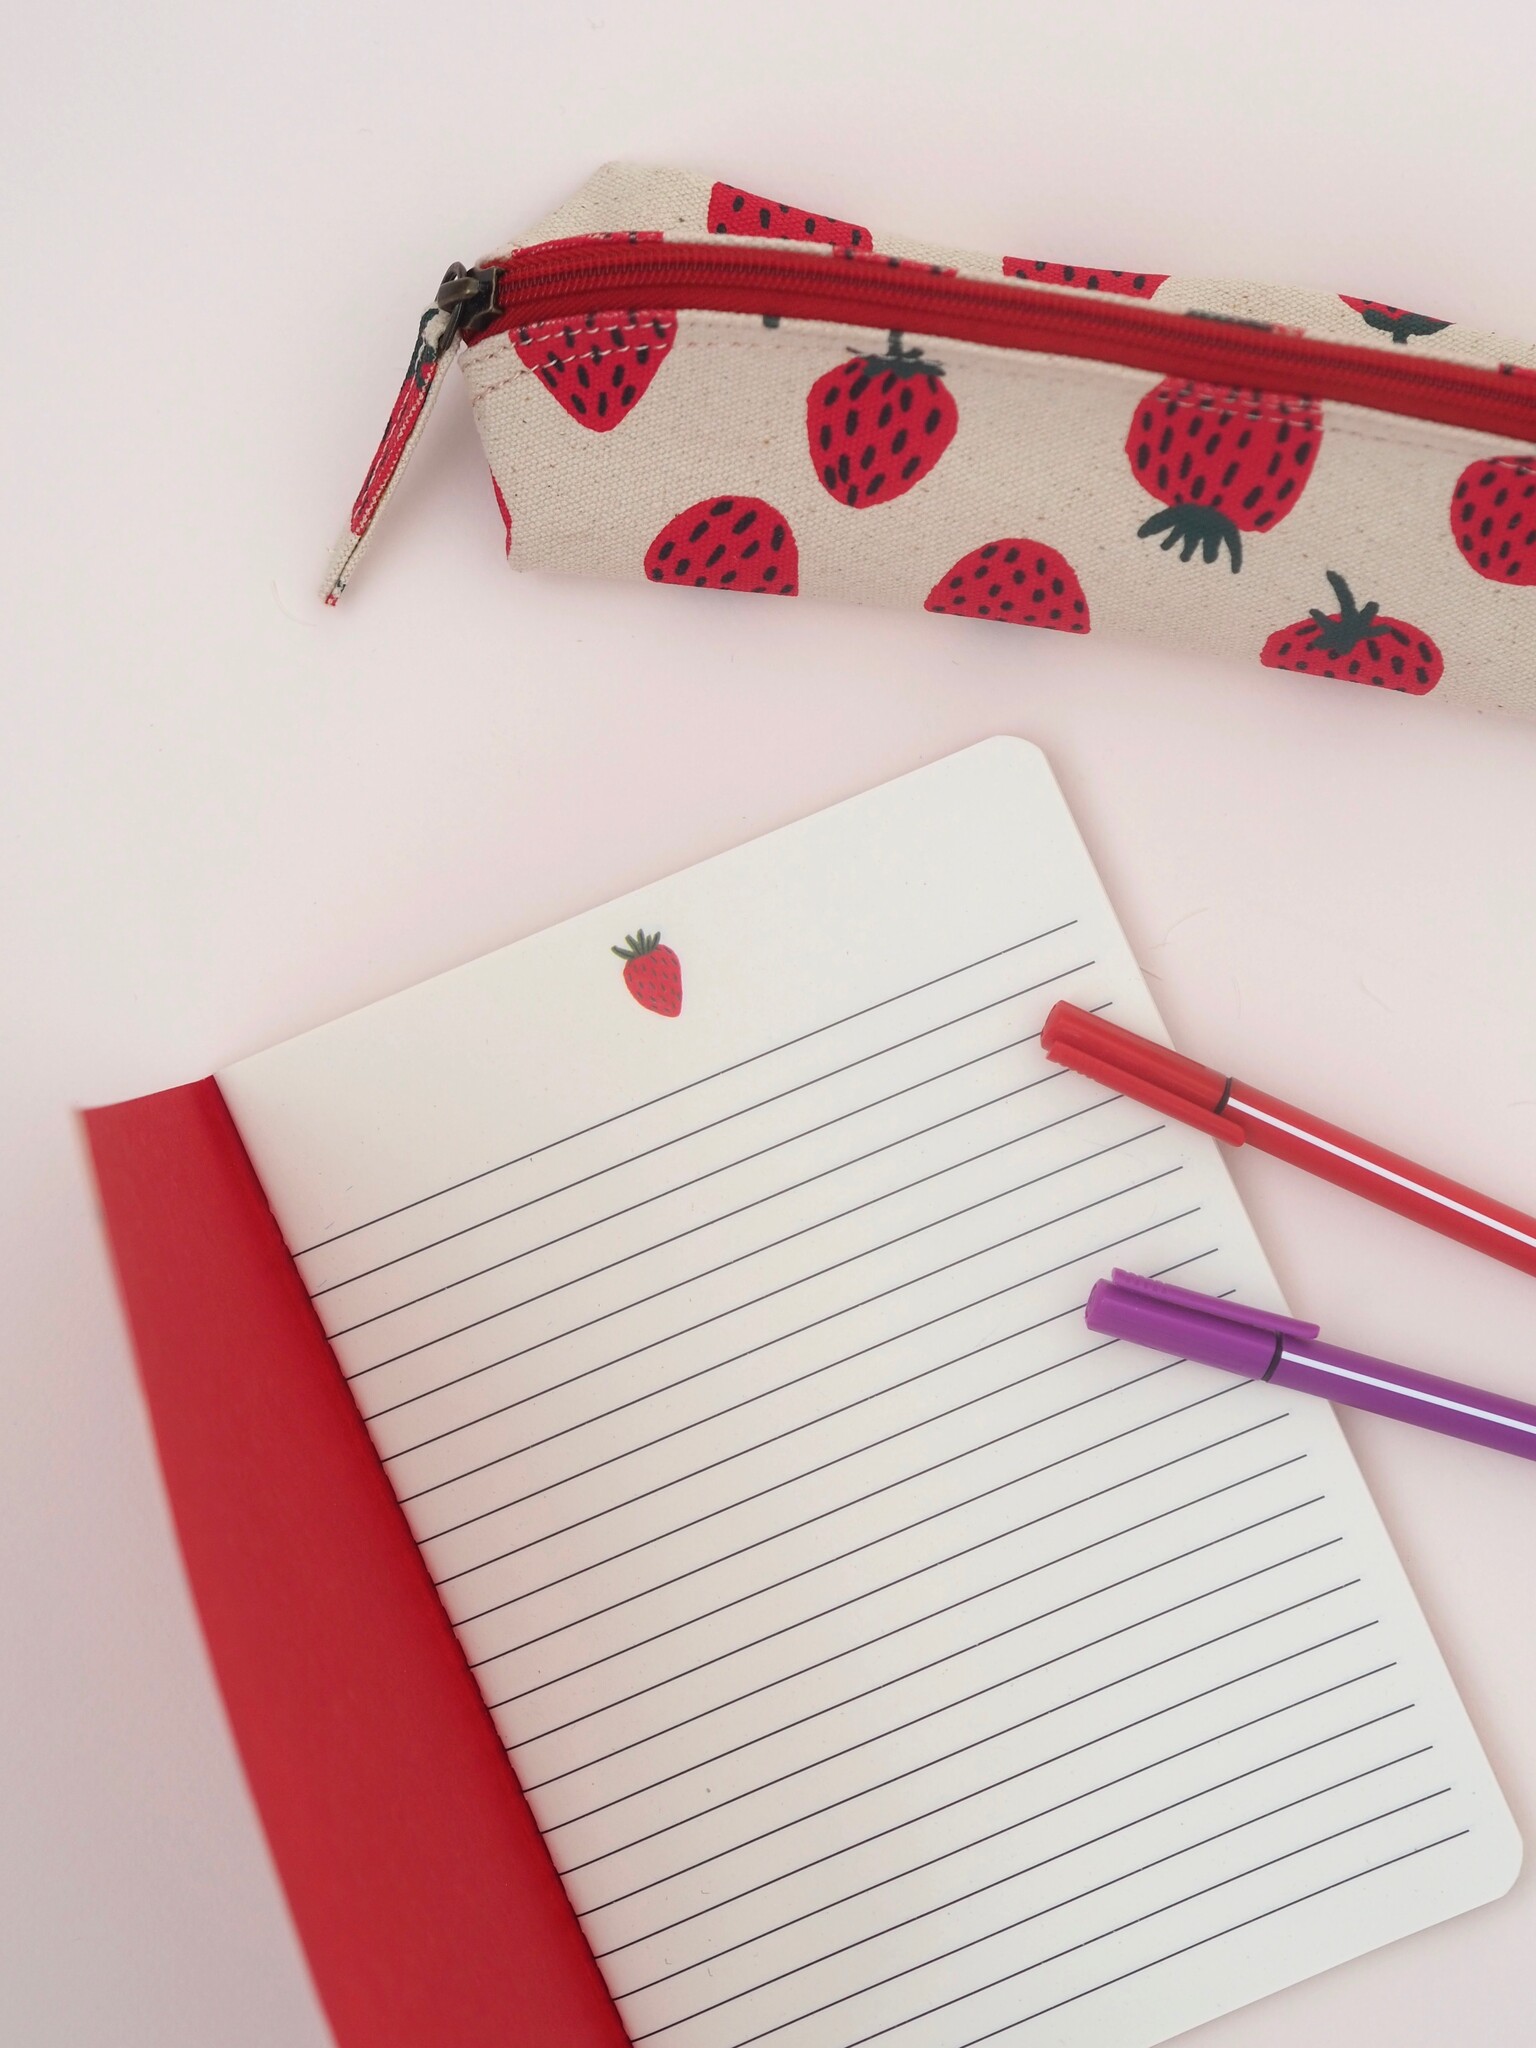 Strawberry notebook and pencil case